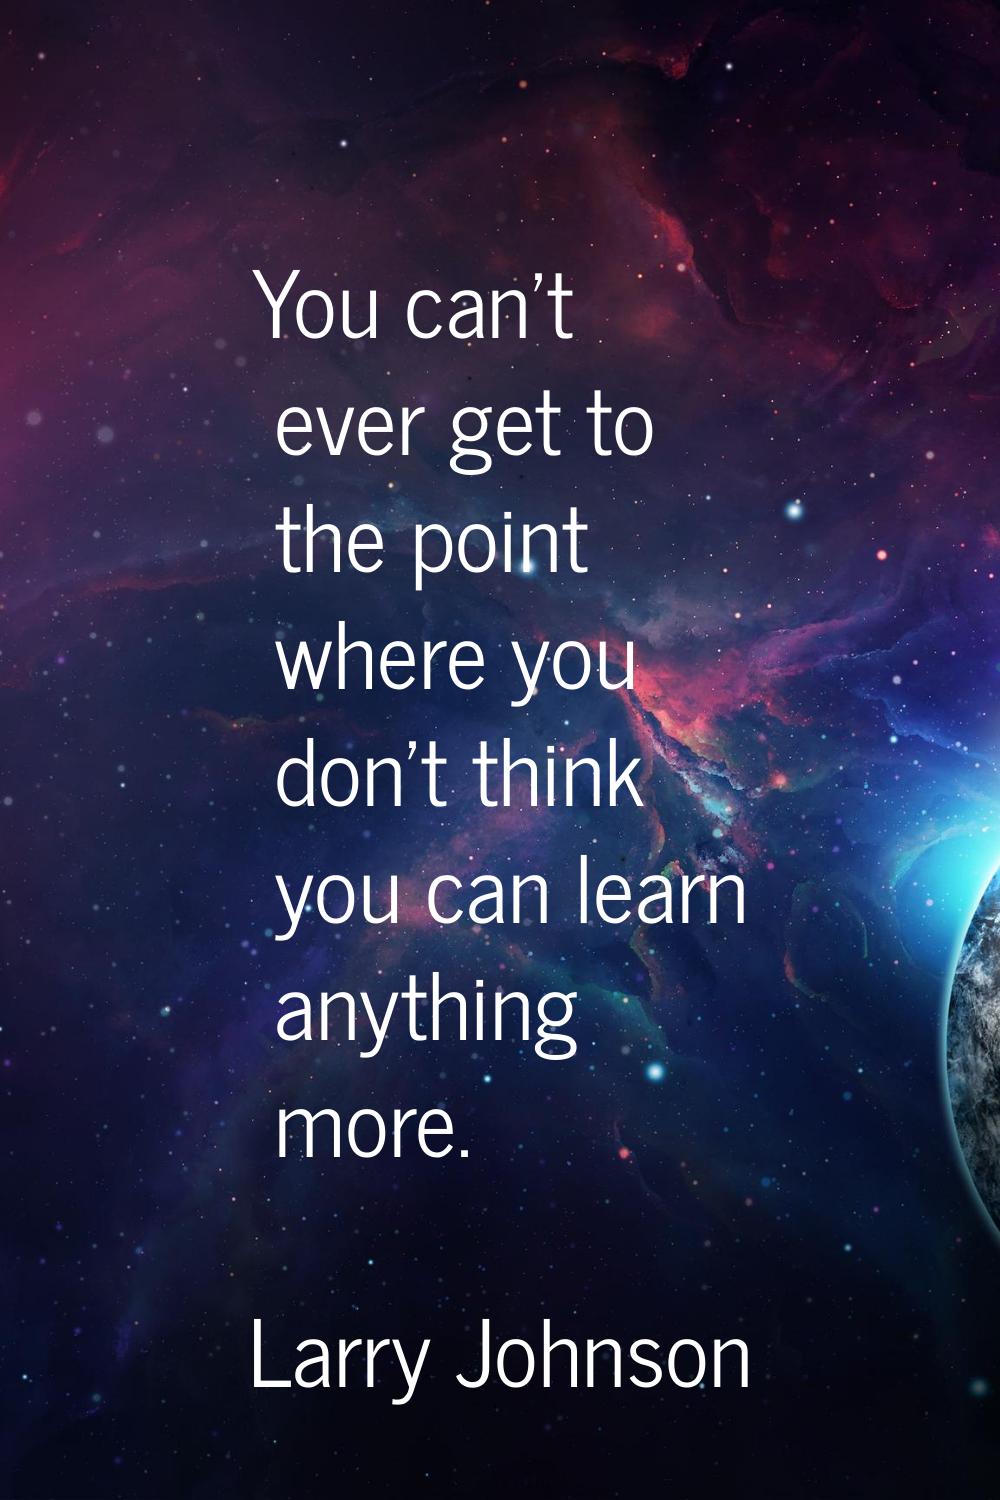 You can't ever get to the point where you don't think you can learn anything more.